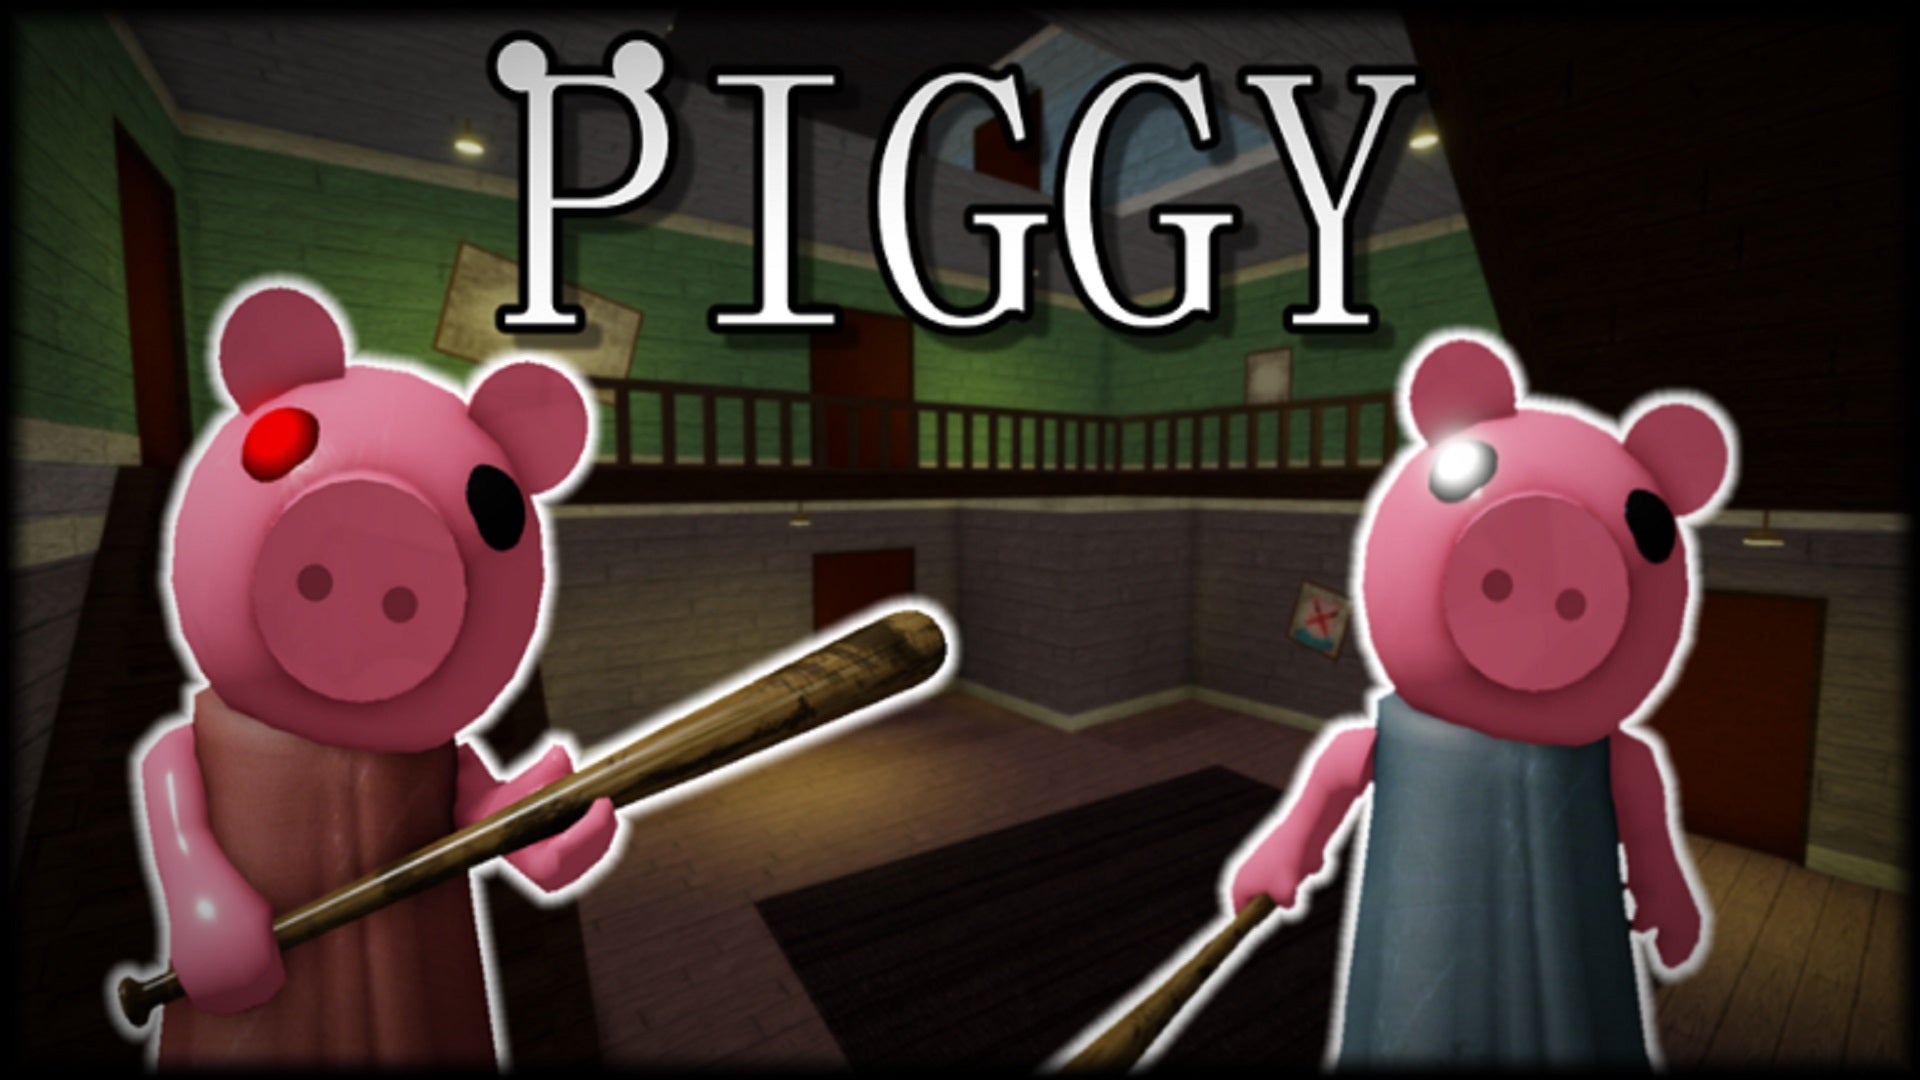 A pair of anthropomorphic pigs armed with baseball bats stand threateningly in an ordinary house. Text in image reads "Piggy".